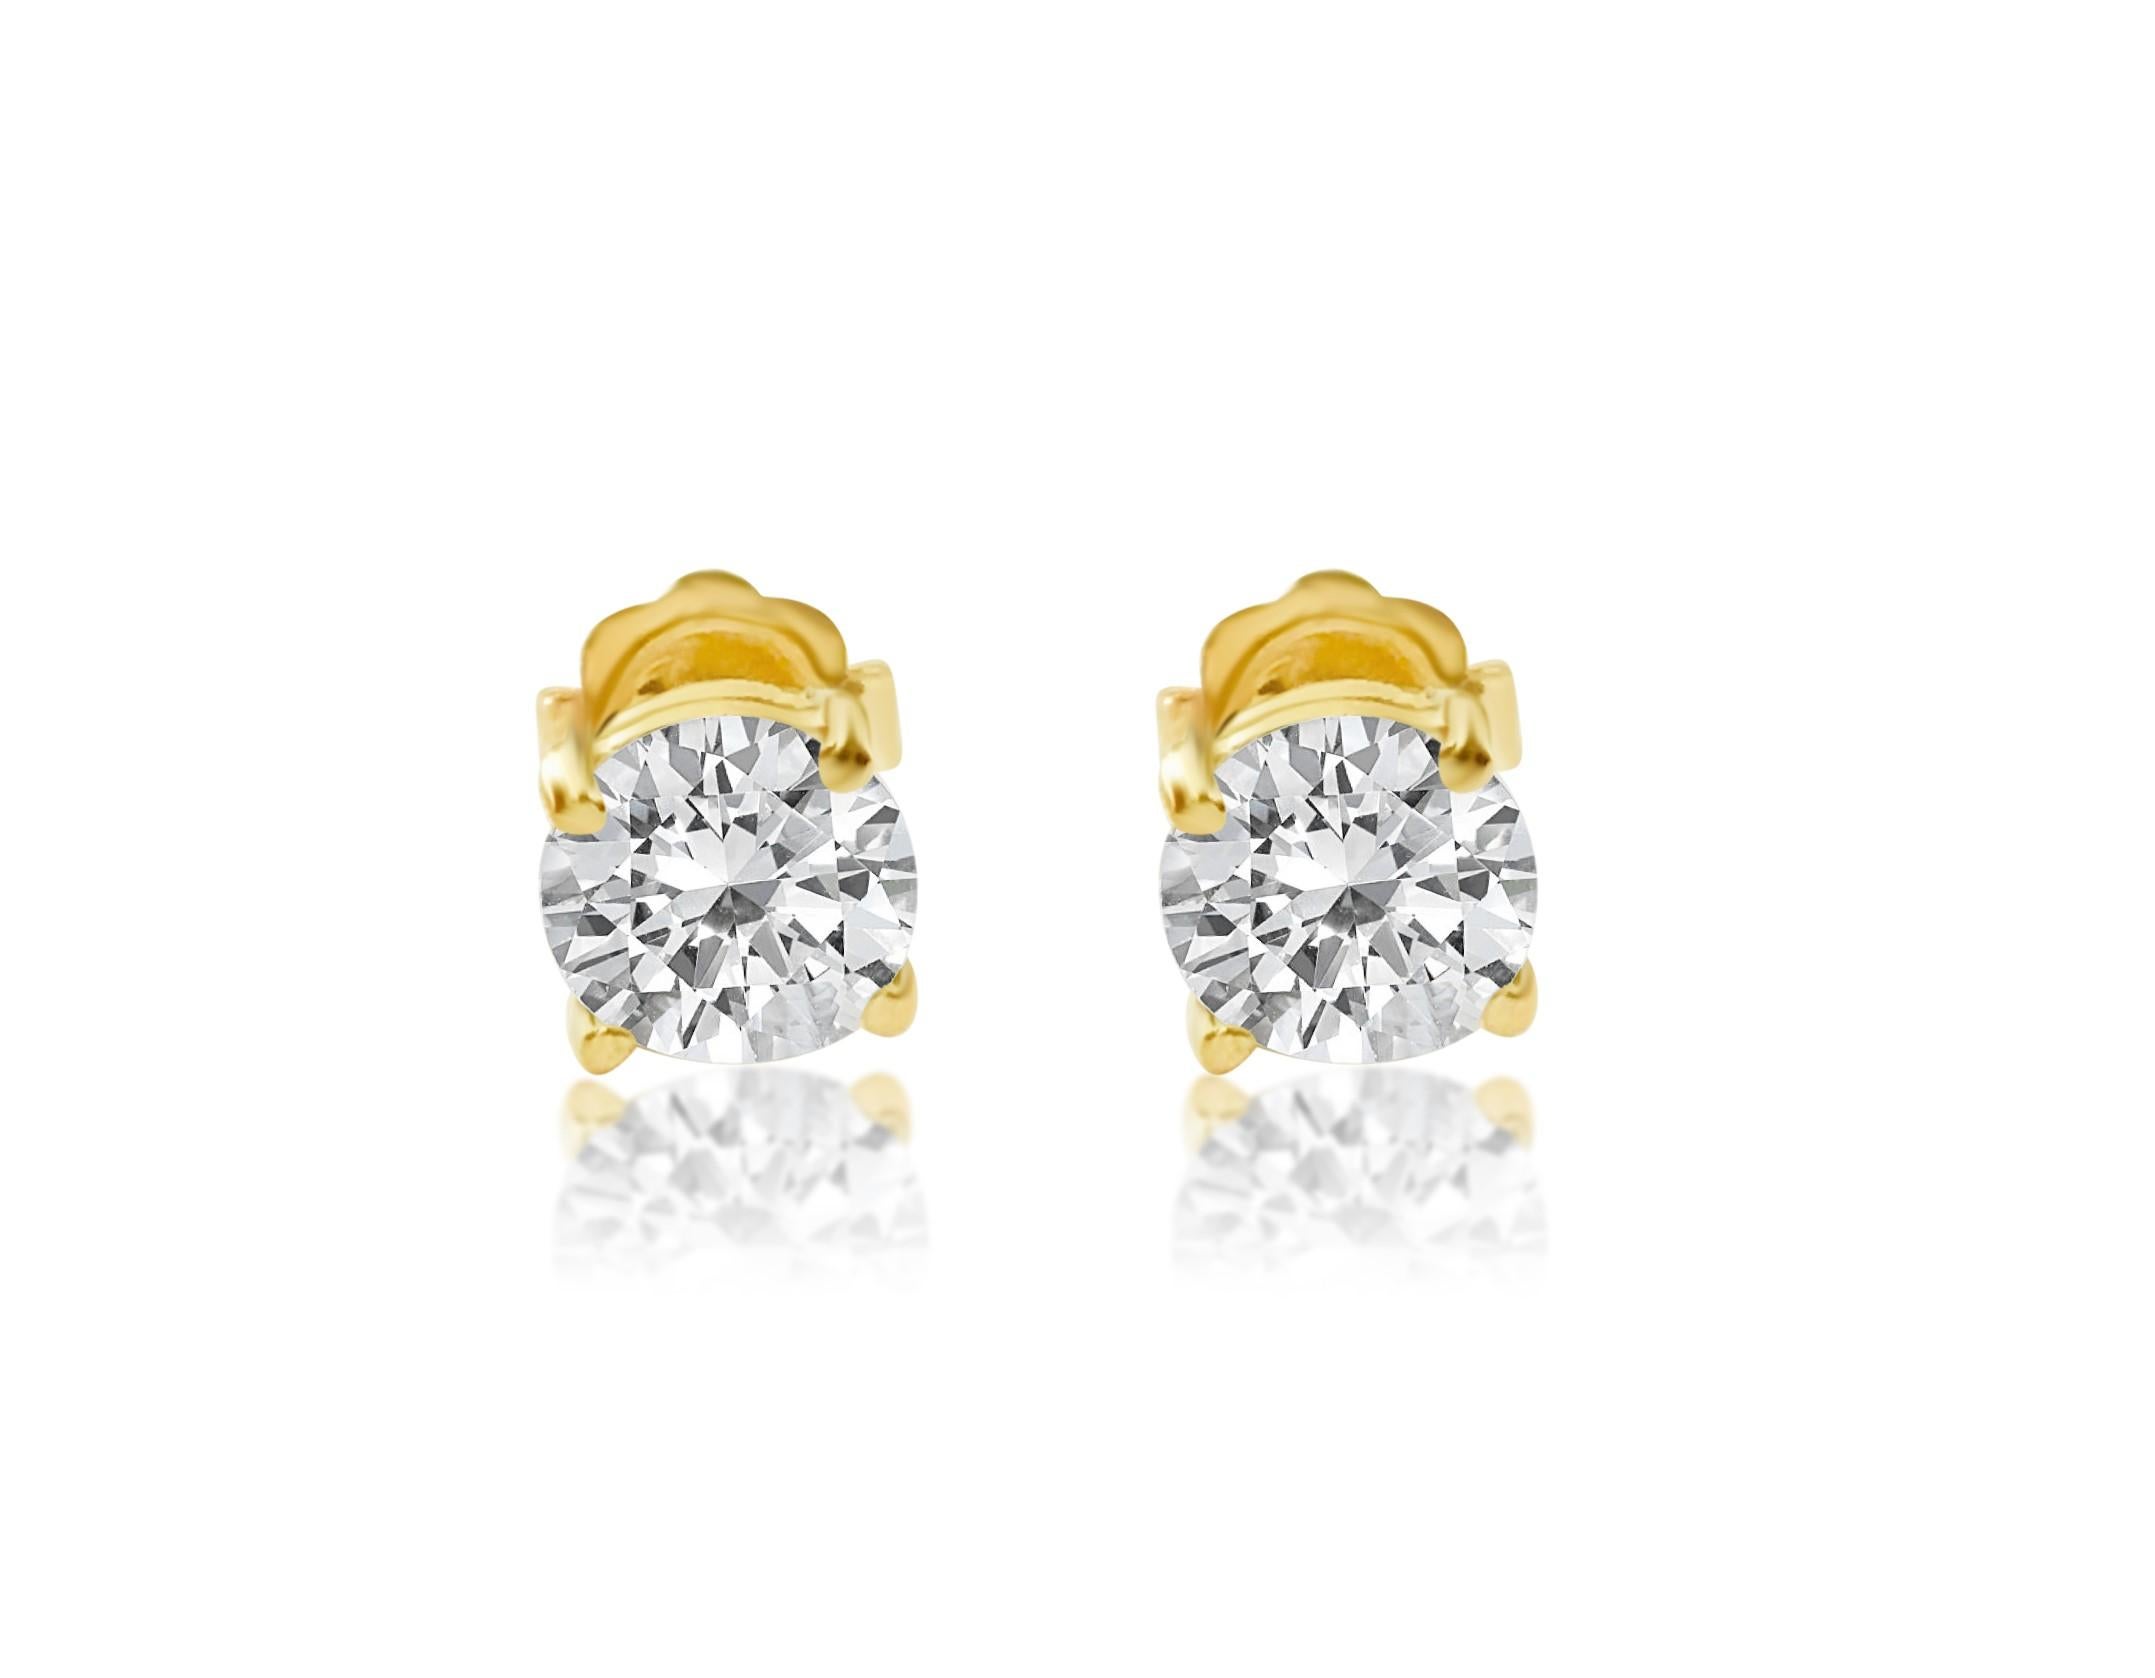 Key Features:

14kt yellow gold. 0.60 carat each diamond studs. 
Total carat weight of the diamonds: 1.20 carats. 
Clarity: I1. Color: H. Prong setting. 
Beautiful butterfly push back studs.100% natural earth mined diamonds. 
Has 14K hallmark. 
Top